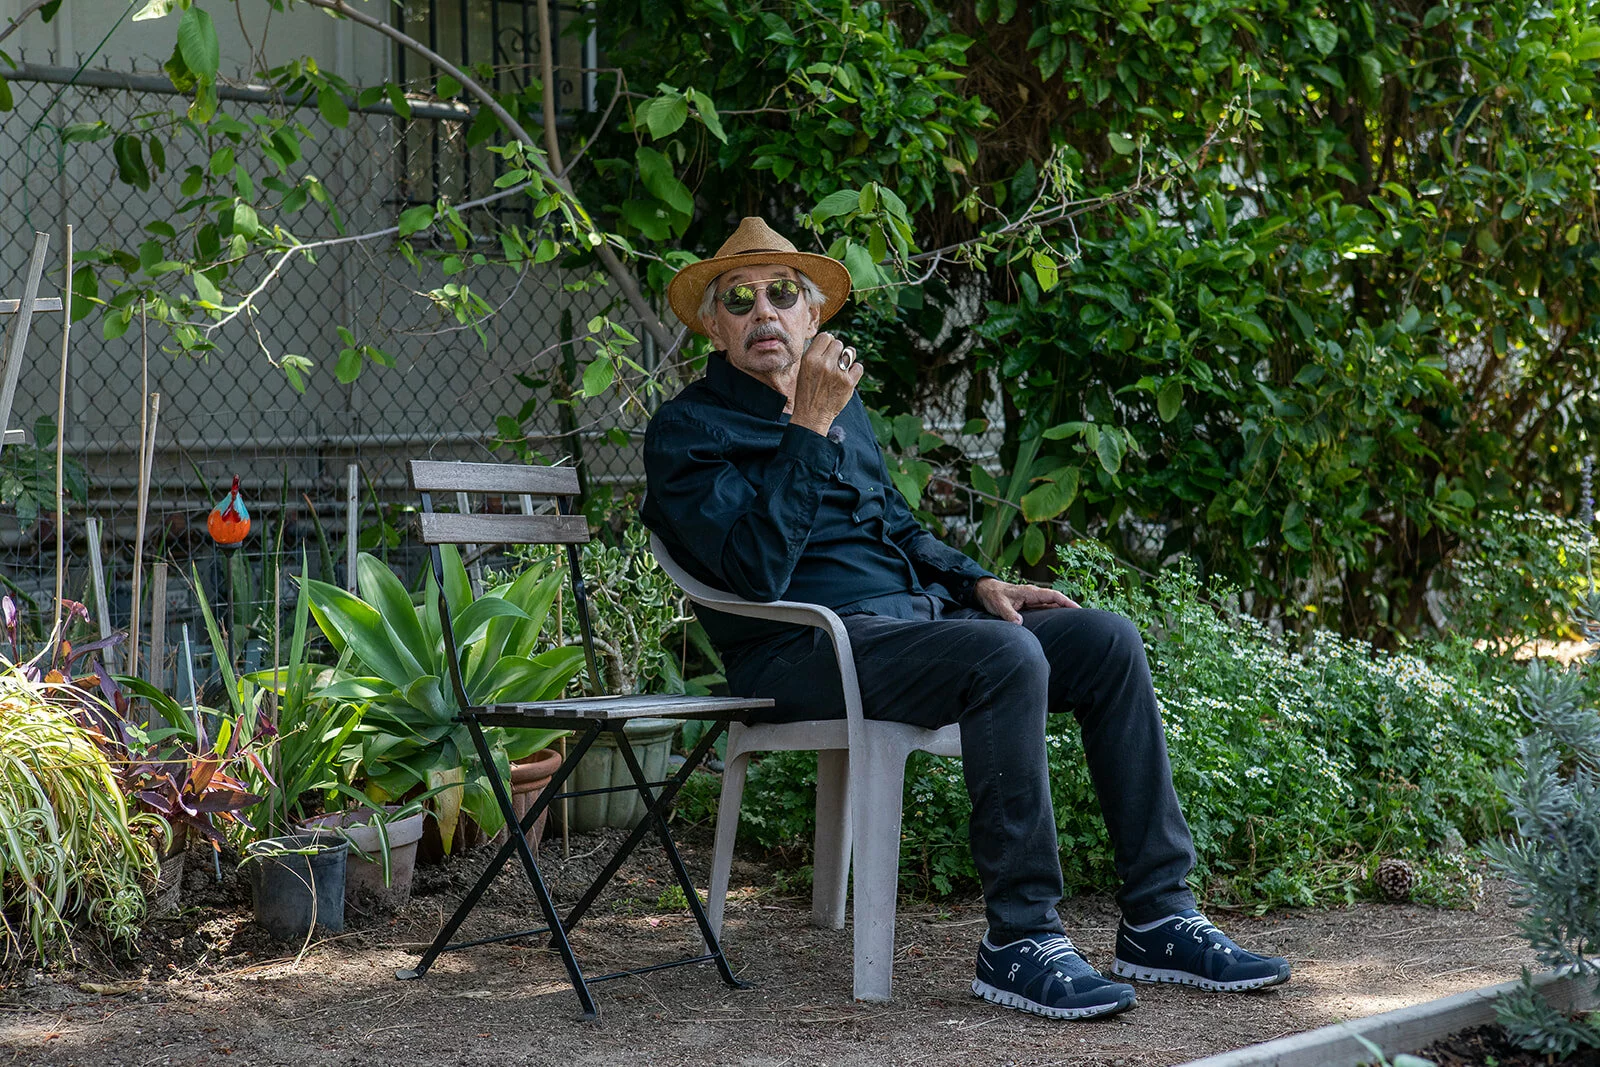 Artist David Lamelas sits on a bench surrounded by green foliage.